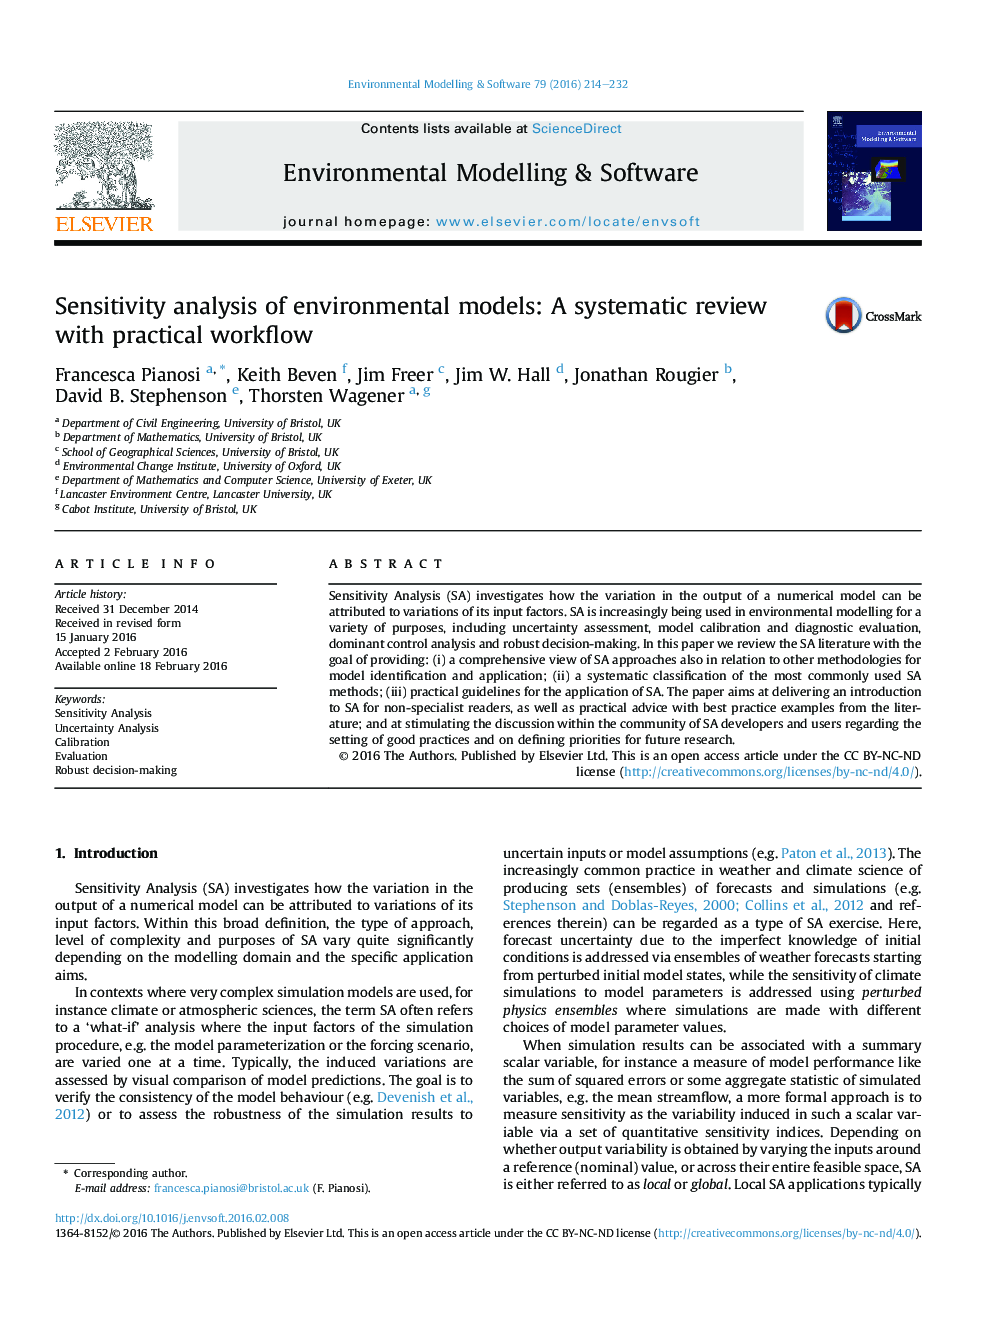 Sensitivity analysis of environmental models: A systematic review with practical workflow